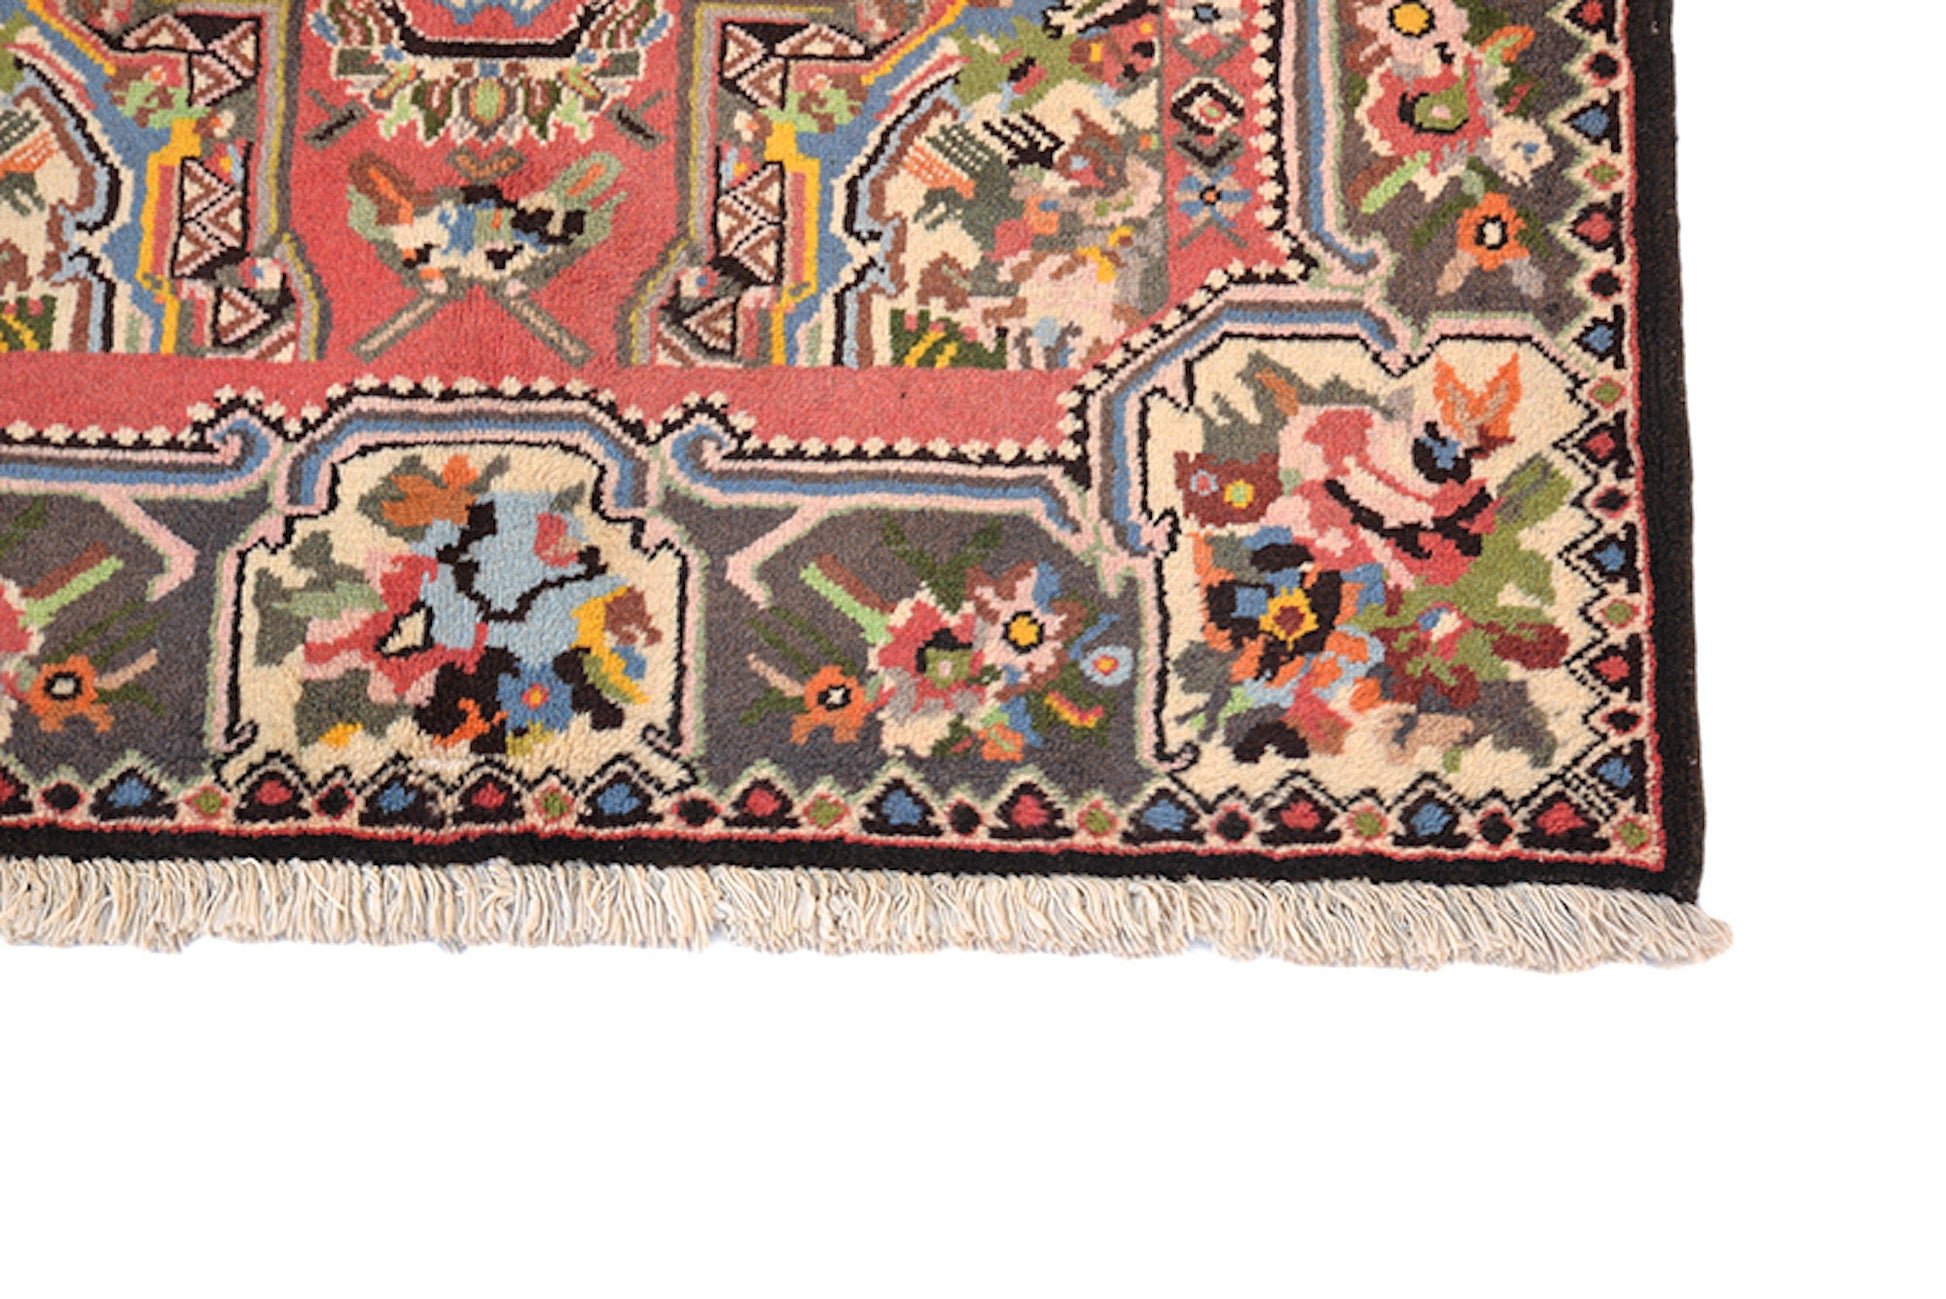 Vintage Floral Rug 4x5 Pink and Brown | Colorful Antique Caucasian Rug | Oriental Border with Accents of Blue